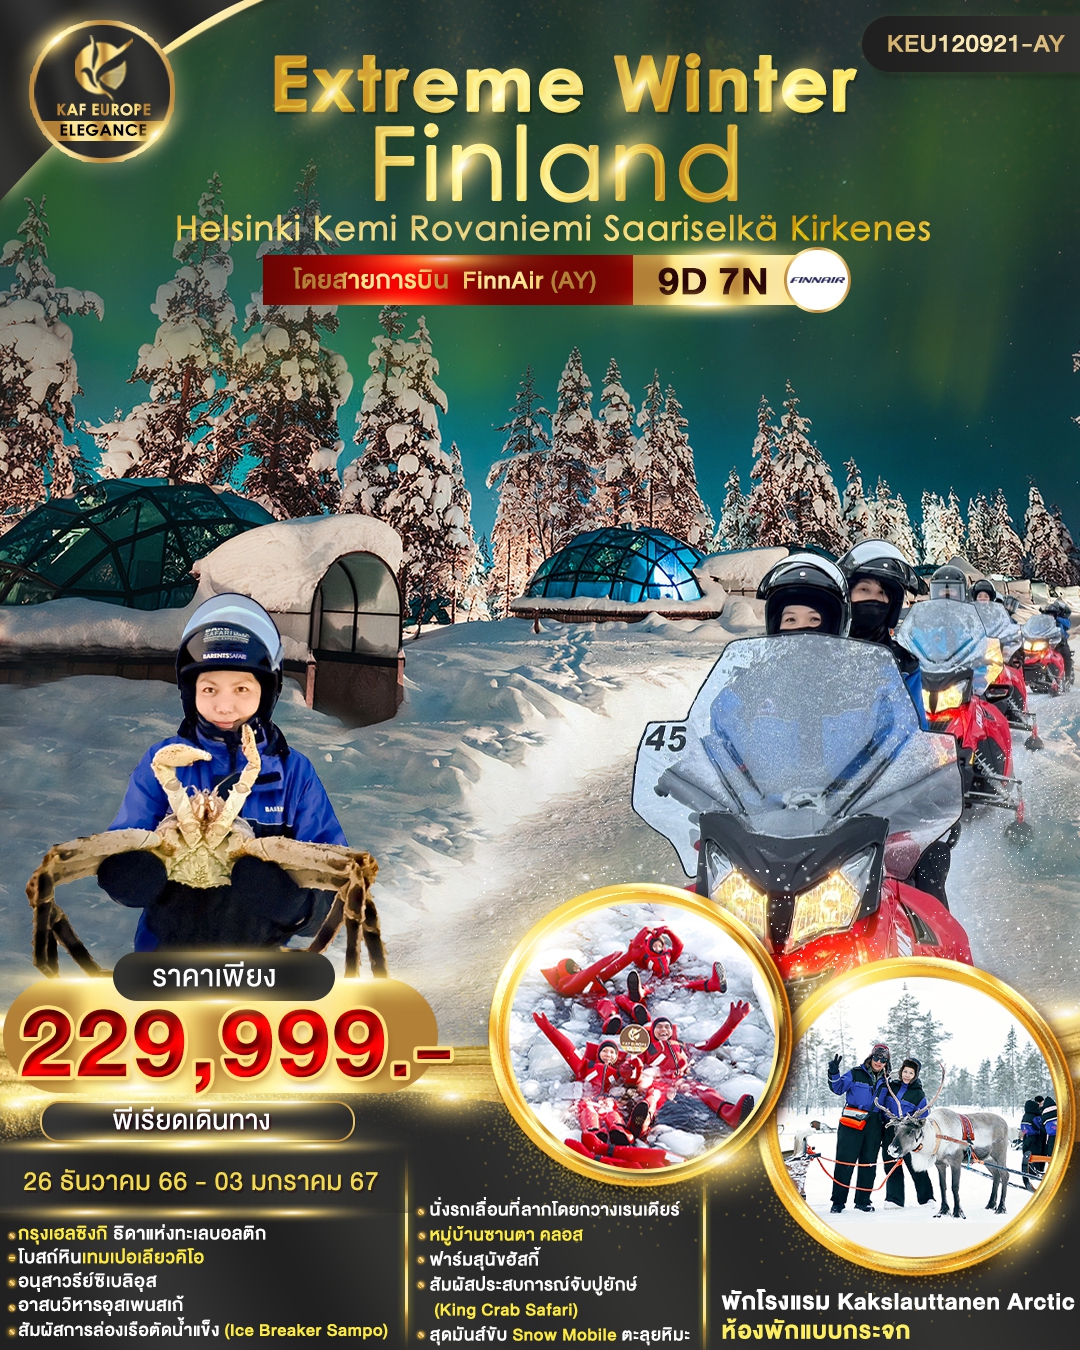 EXTREME WINTER FINLAND 9D7N BY AY